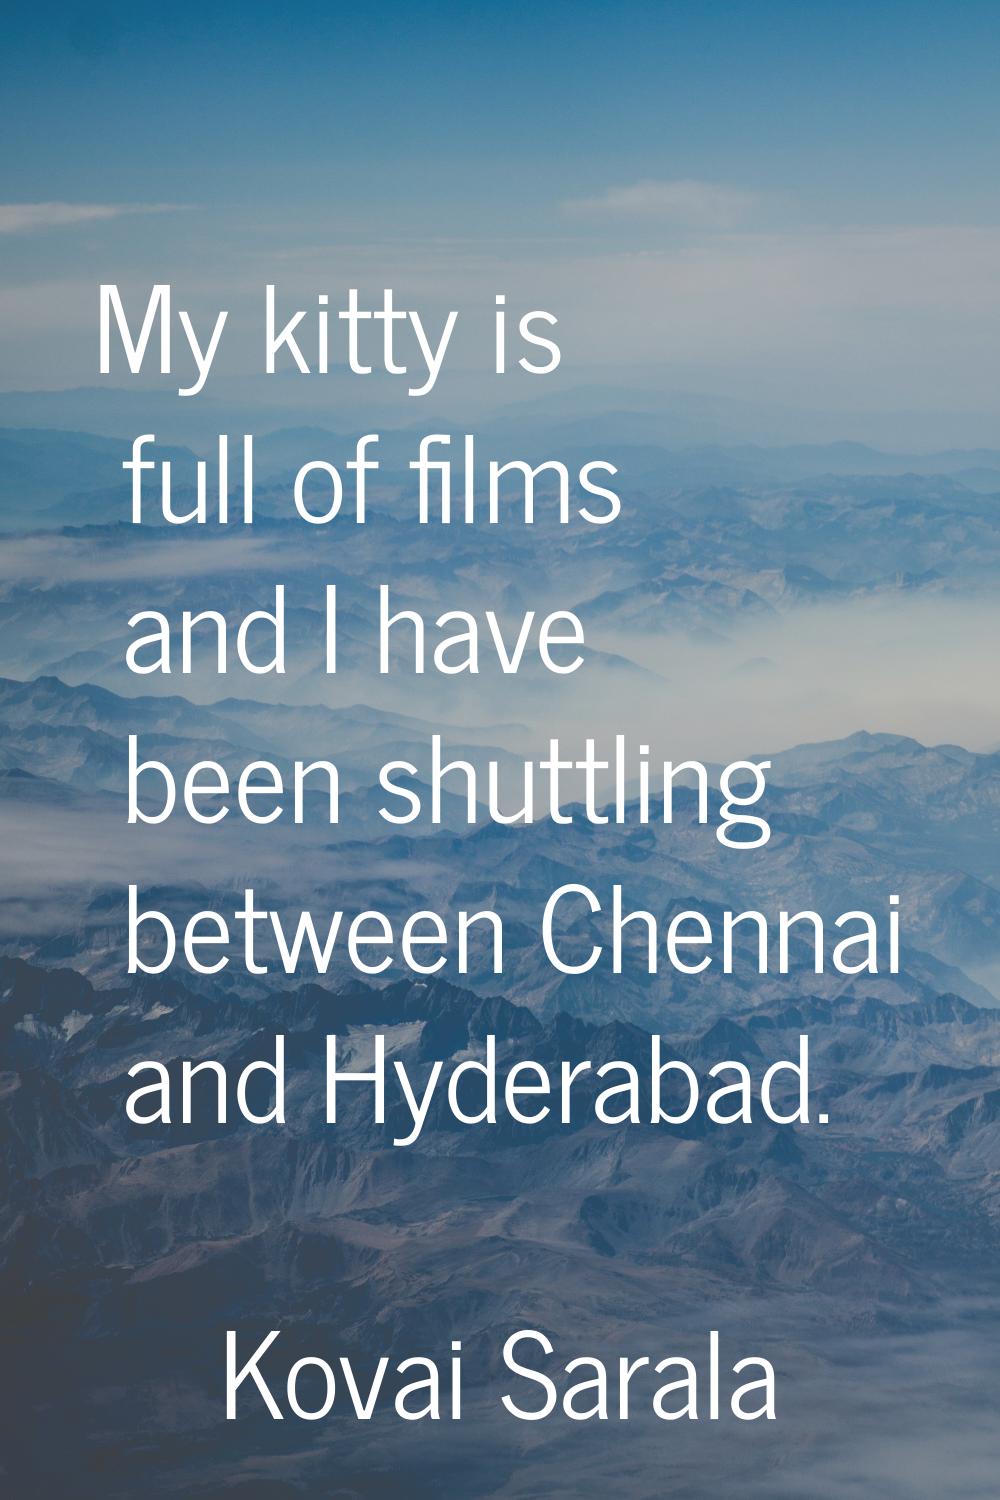 My kitty is full of films and I have been shuttling between Chennai and Hyderabad.